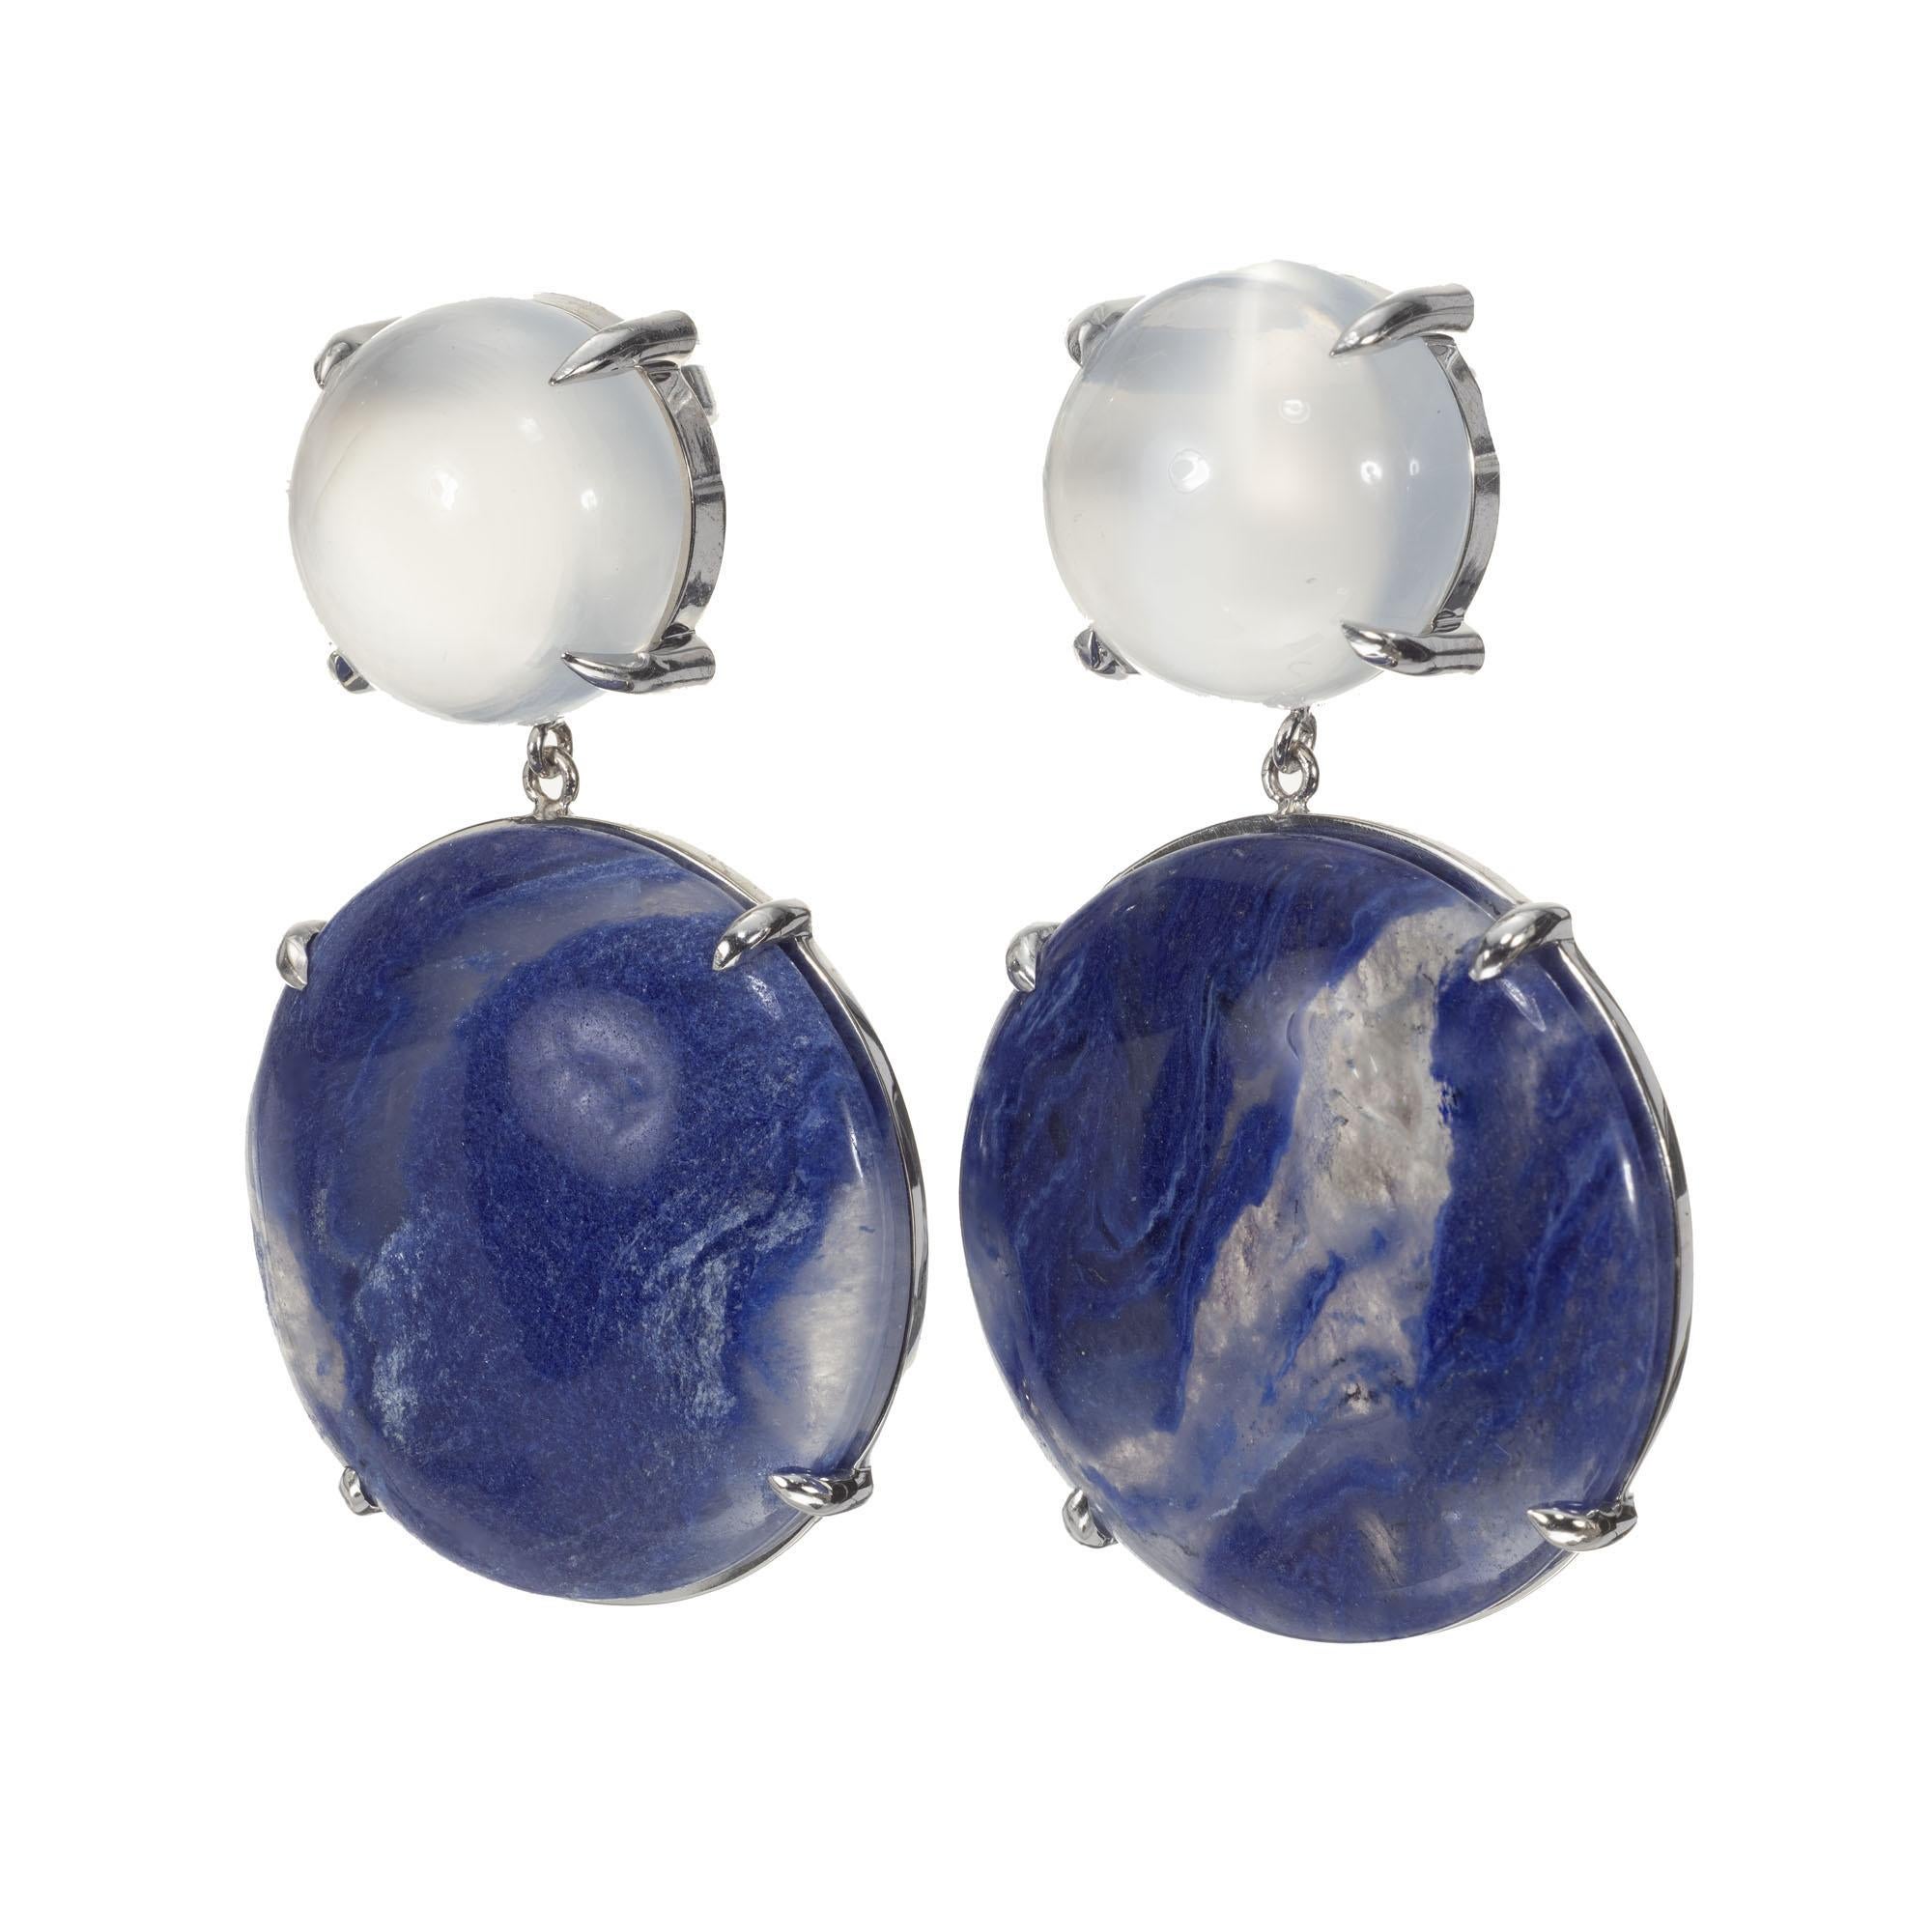 Peter Suchy moonstone and blue quartz dangle earrings in 14k white gold. Two 12.50ct moonstone tops with two 34.19ct blue quartz dangles. 

2 round cabochon white irradiated moonstones, approx. 12.5cts
2 round marbled blue cabochon quartz, approx.